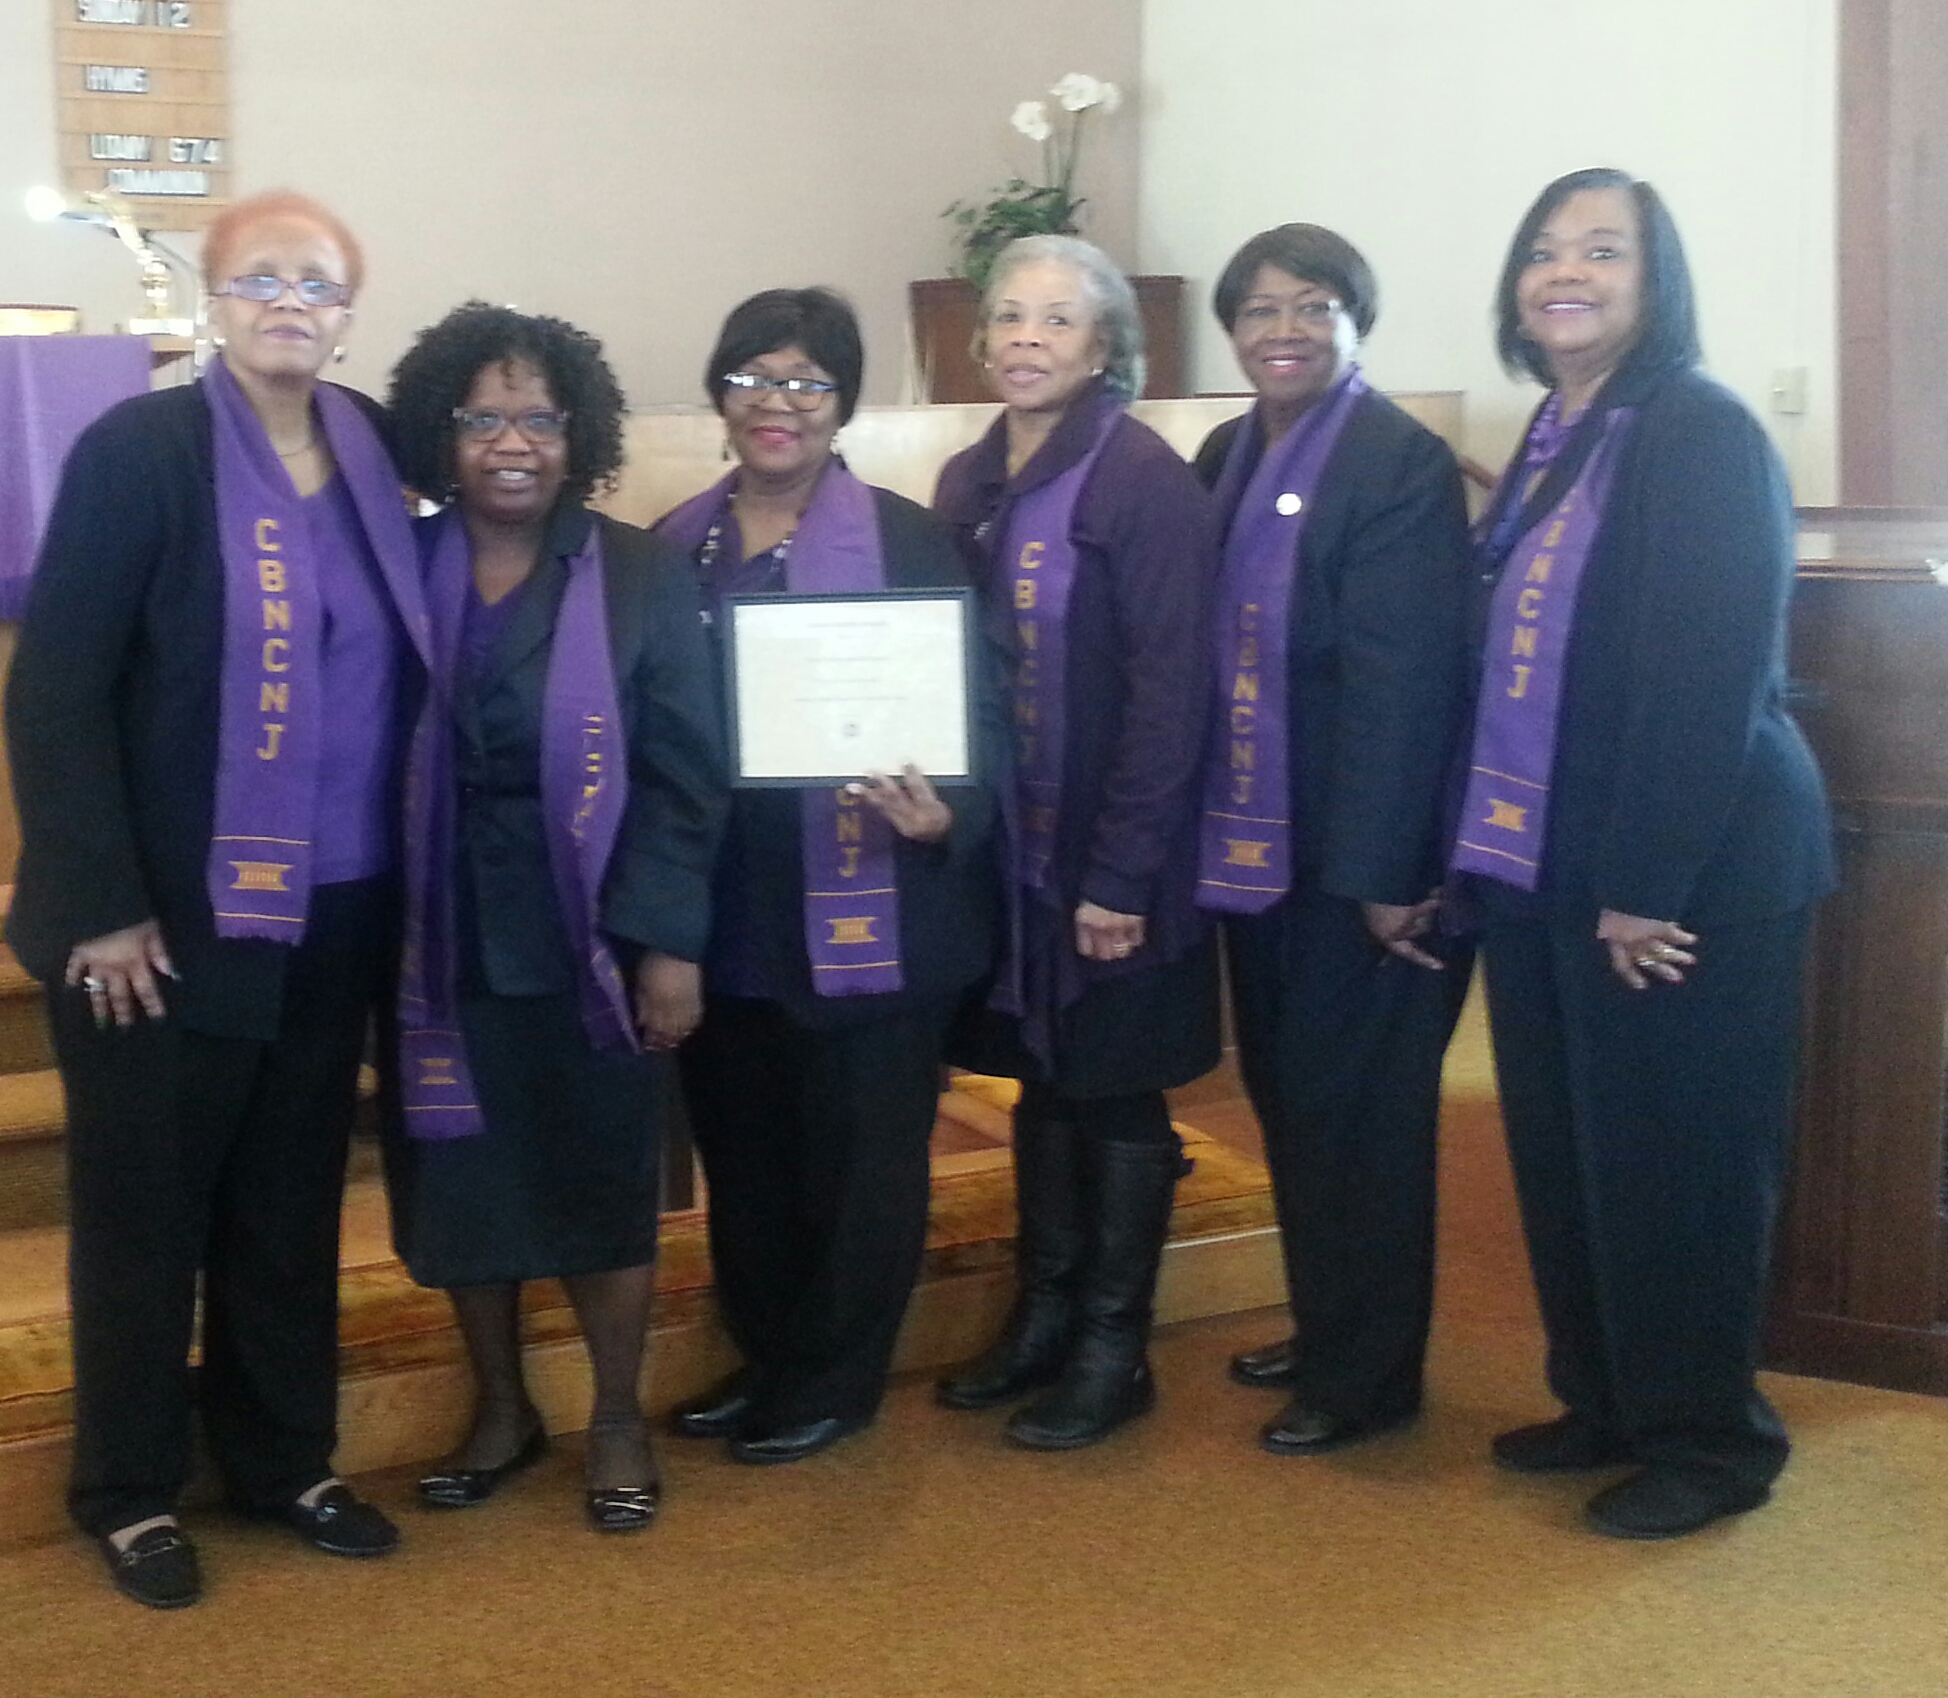 The CBNCNJ was honored with the Human Rights Reward by the Church Women United on March 17, 2017  left to right President Sandra Pritchard Tara Spaulding, Gail Williams, Gloria Bivins, Sheila Penn, Barbara Sunnerville